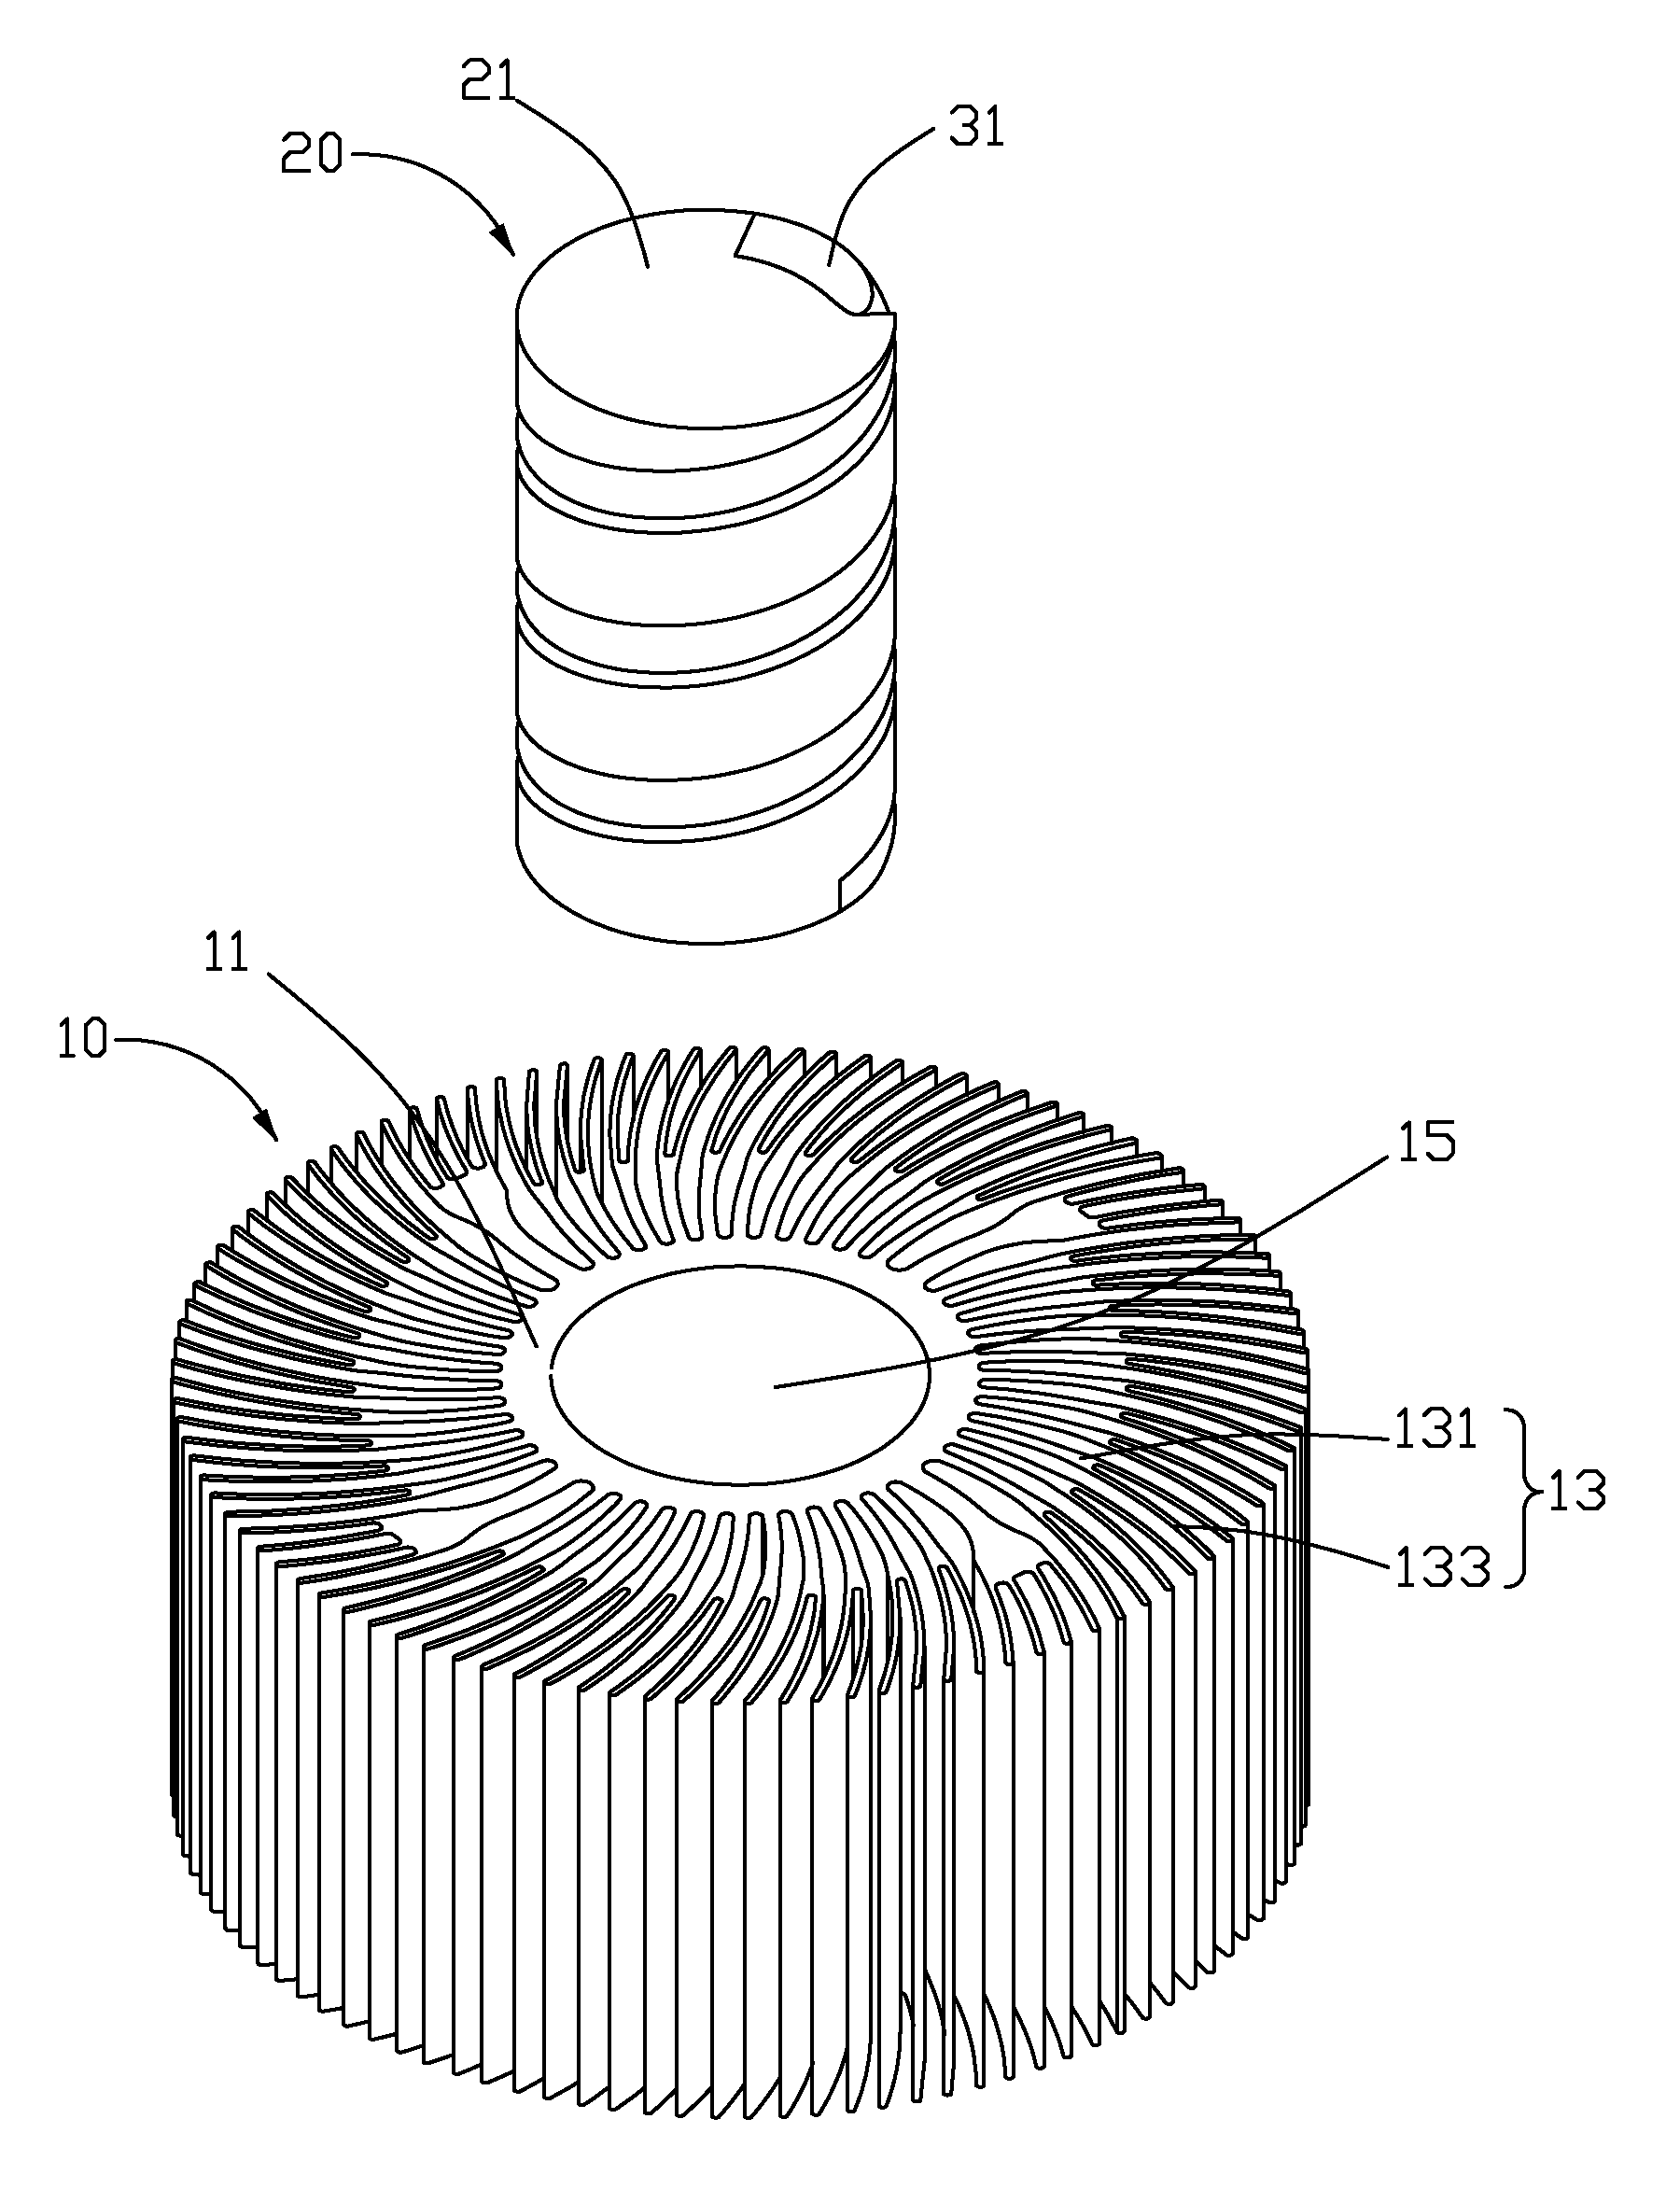 Heat dissipation device with a heat pipe